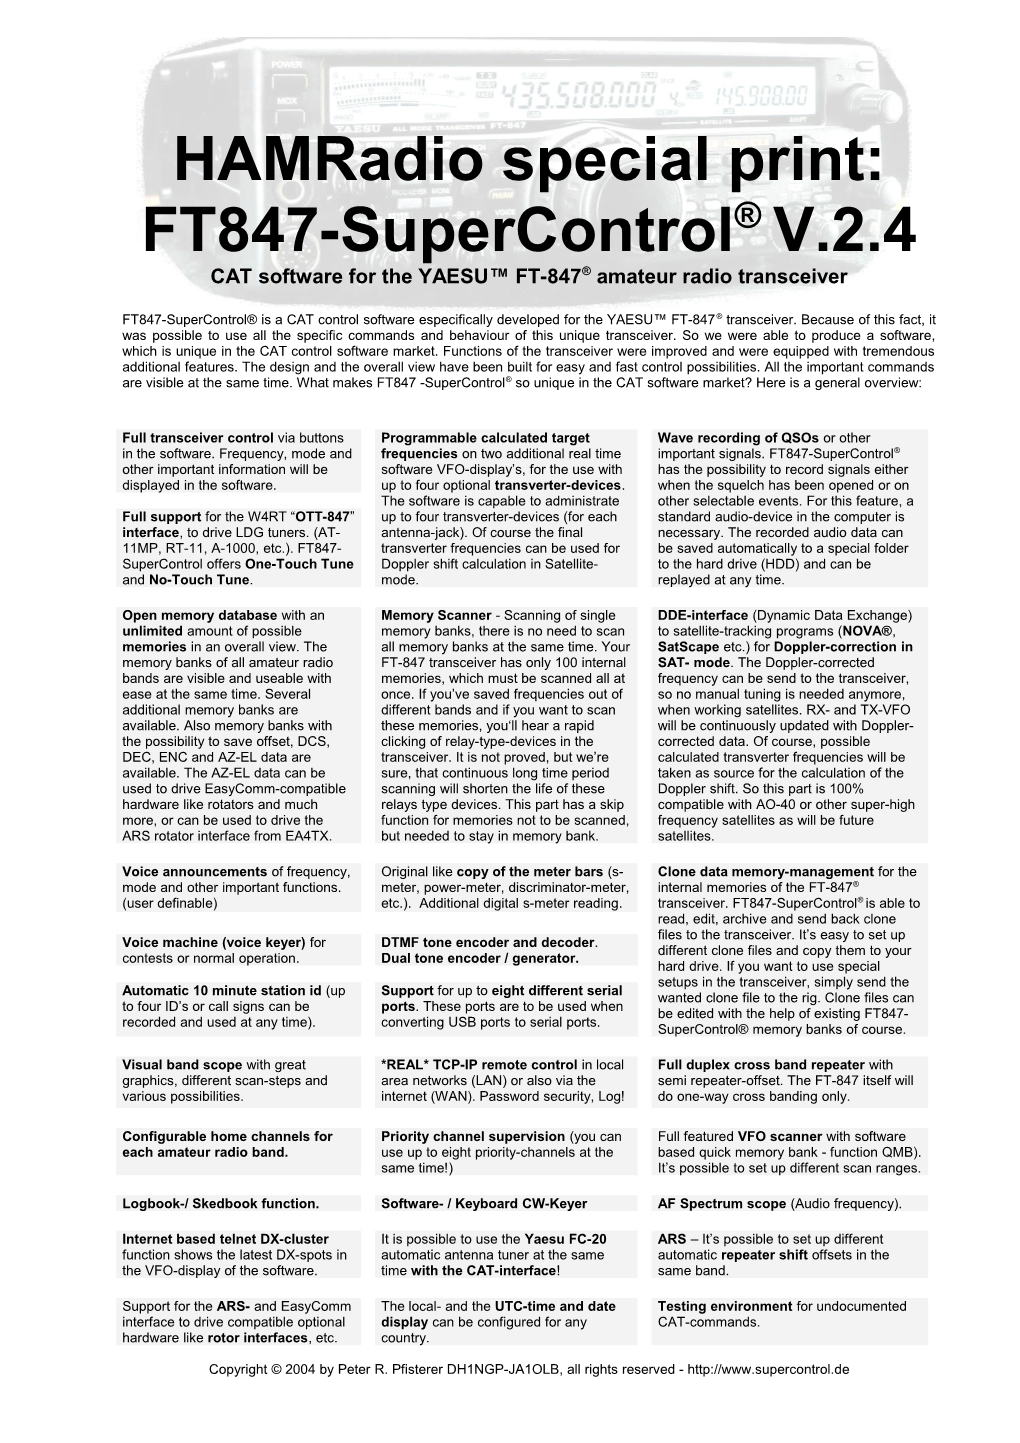 Hamradio Special Print:FT847-Supercontrol V.2.4CAT Software for the YAESU FT-847 Amateur